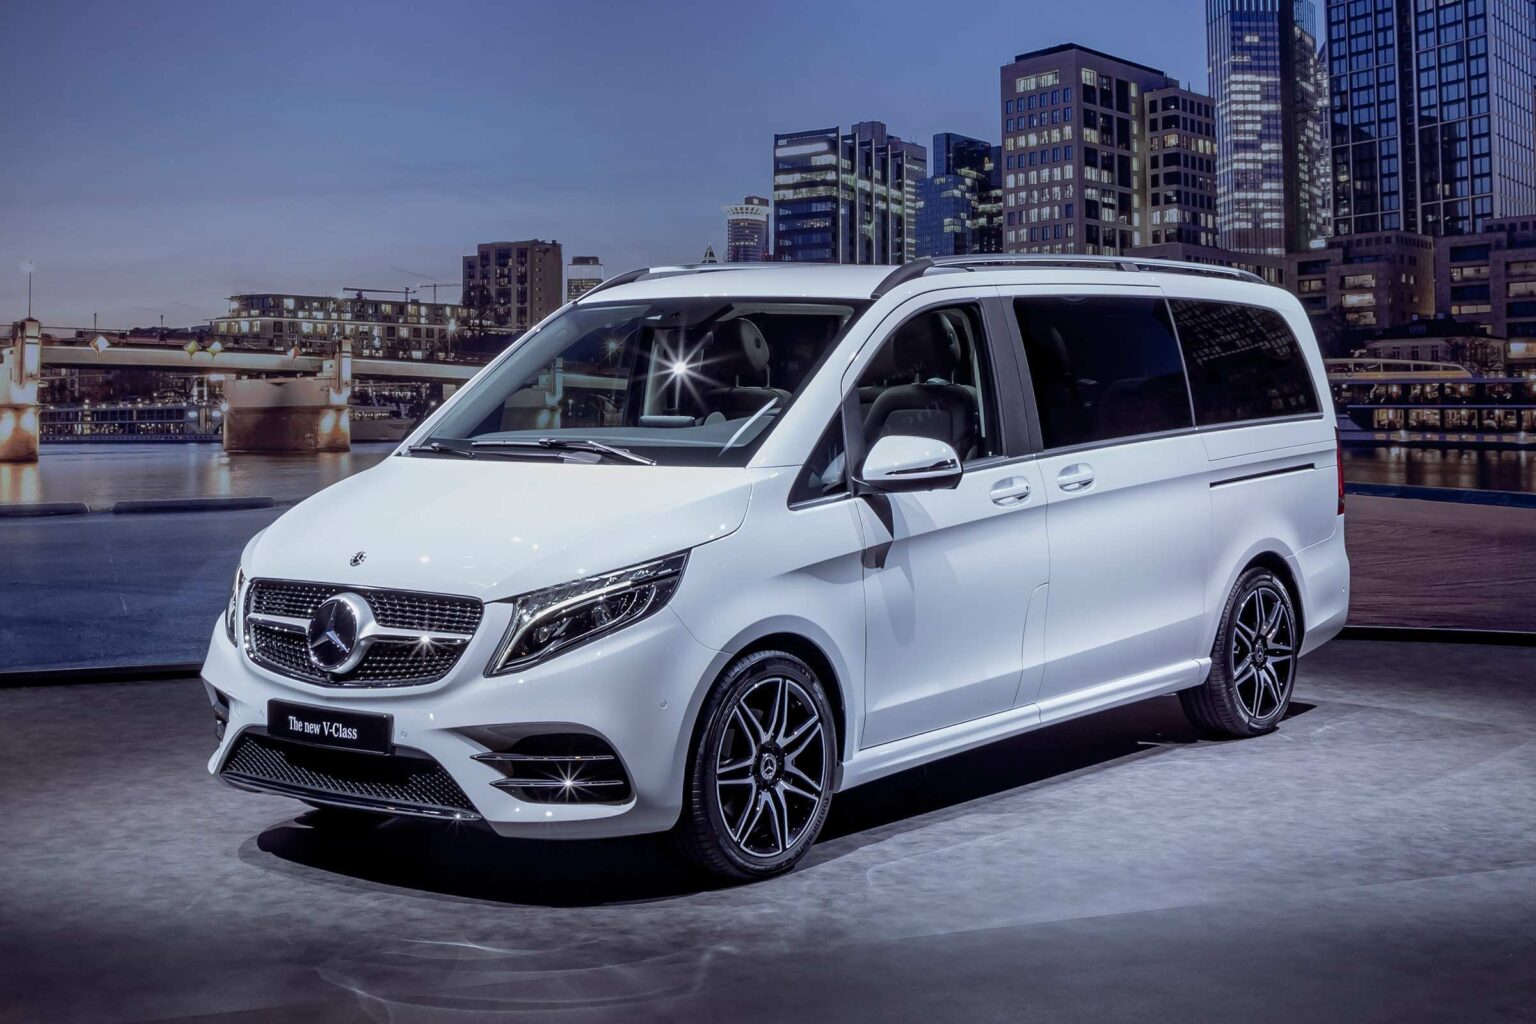 Top Features of the Mercedes V-Class That Enhance Your Luxury Travel Experience